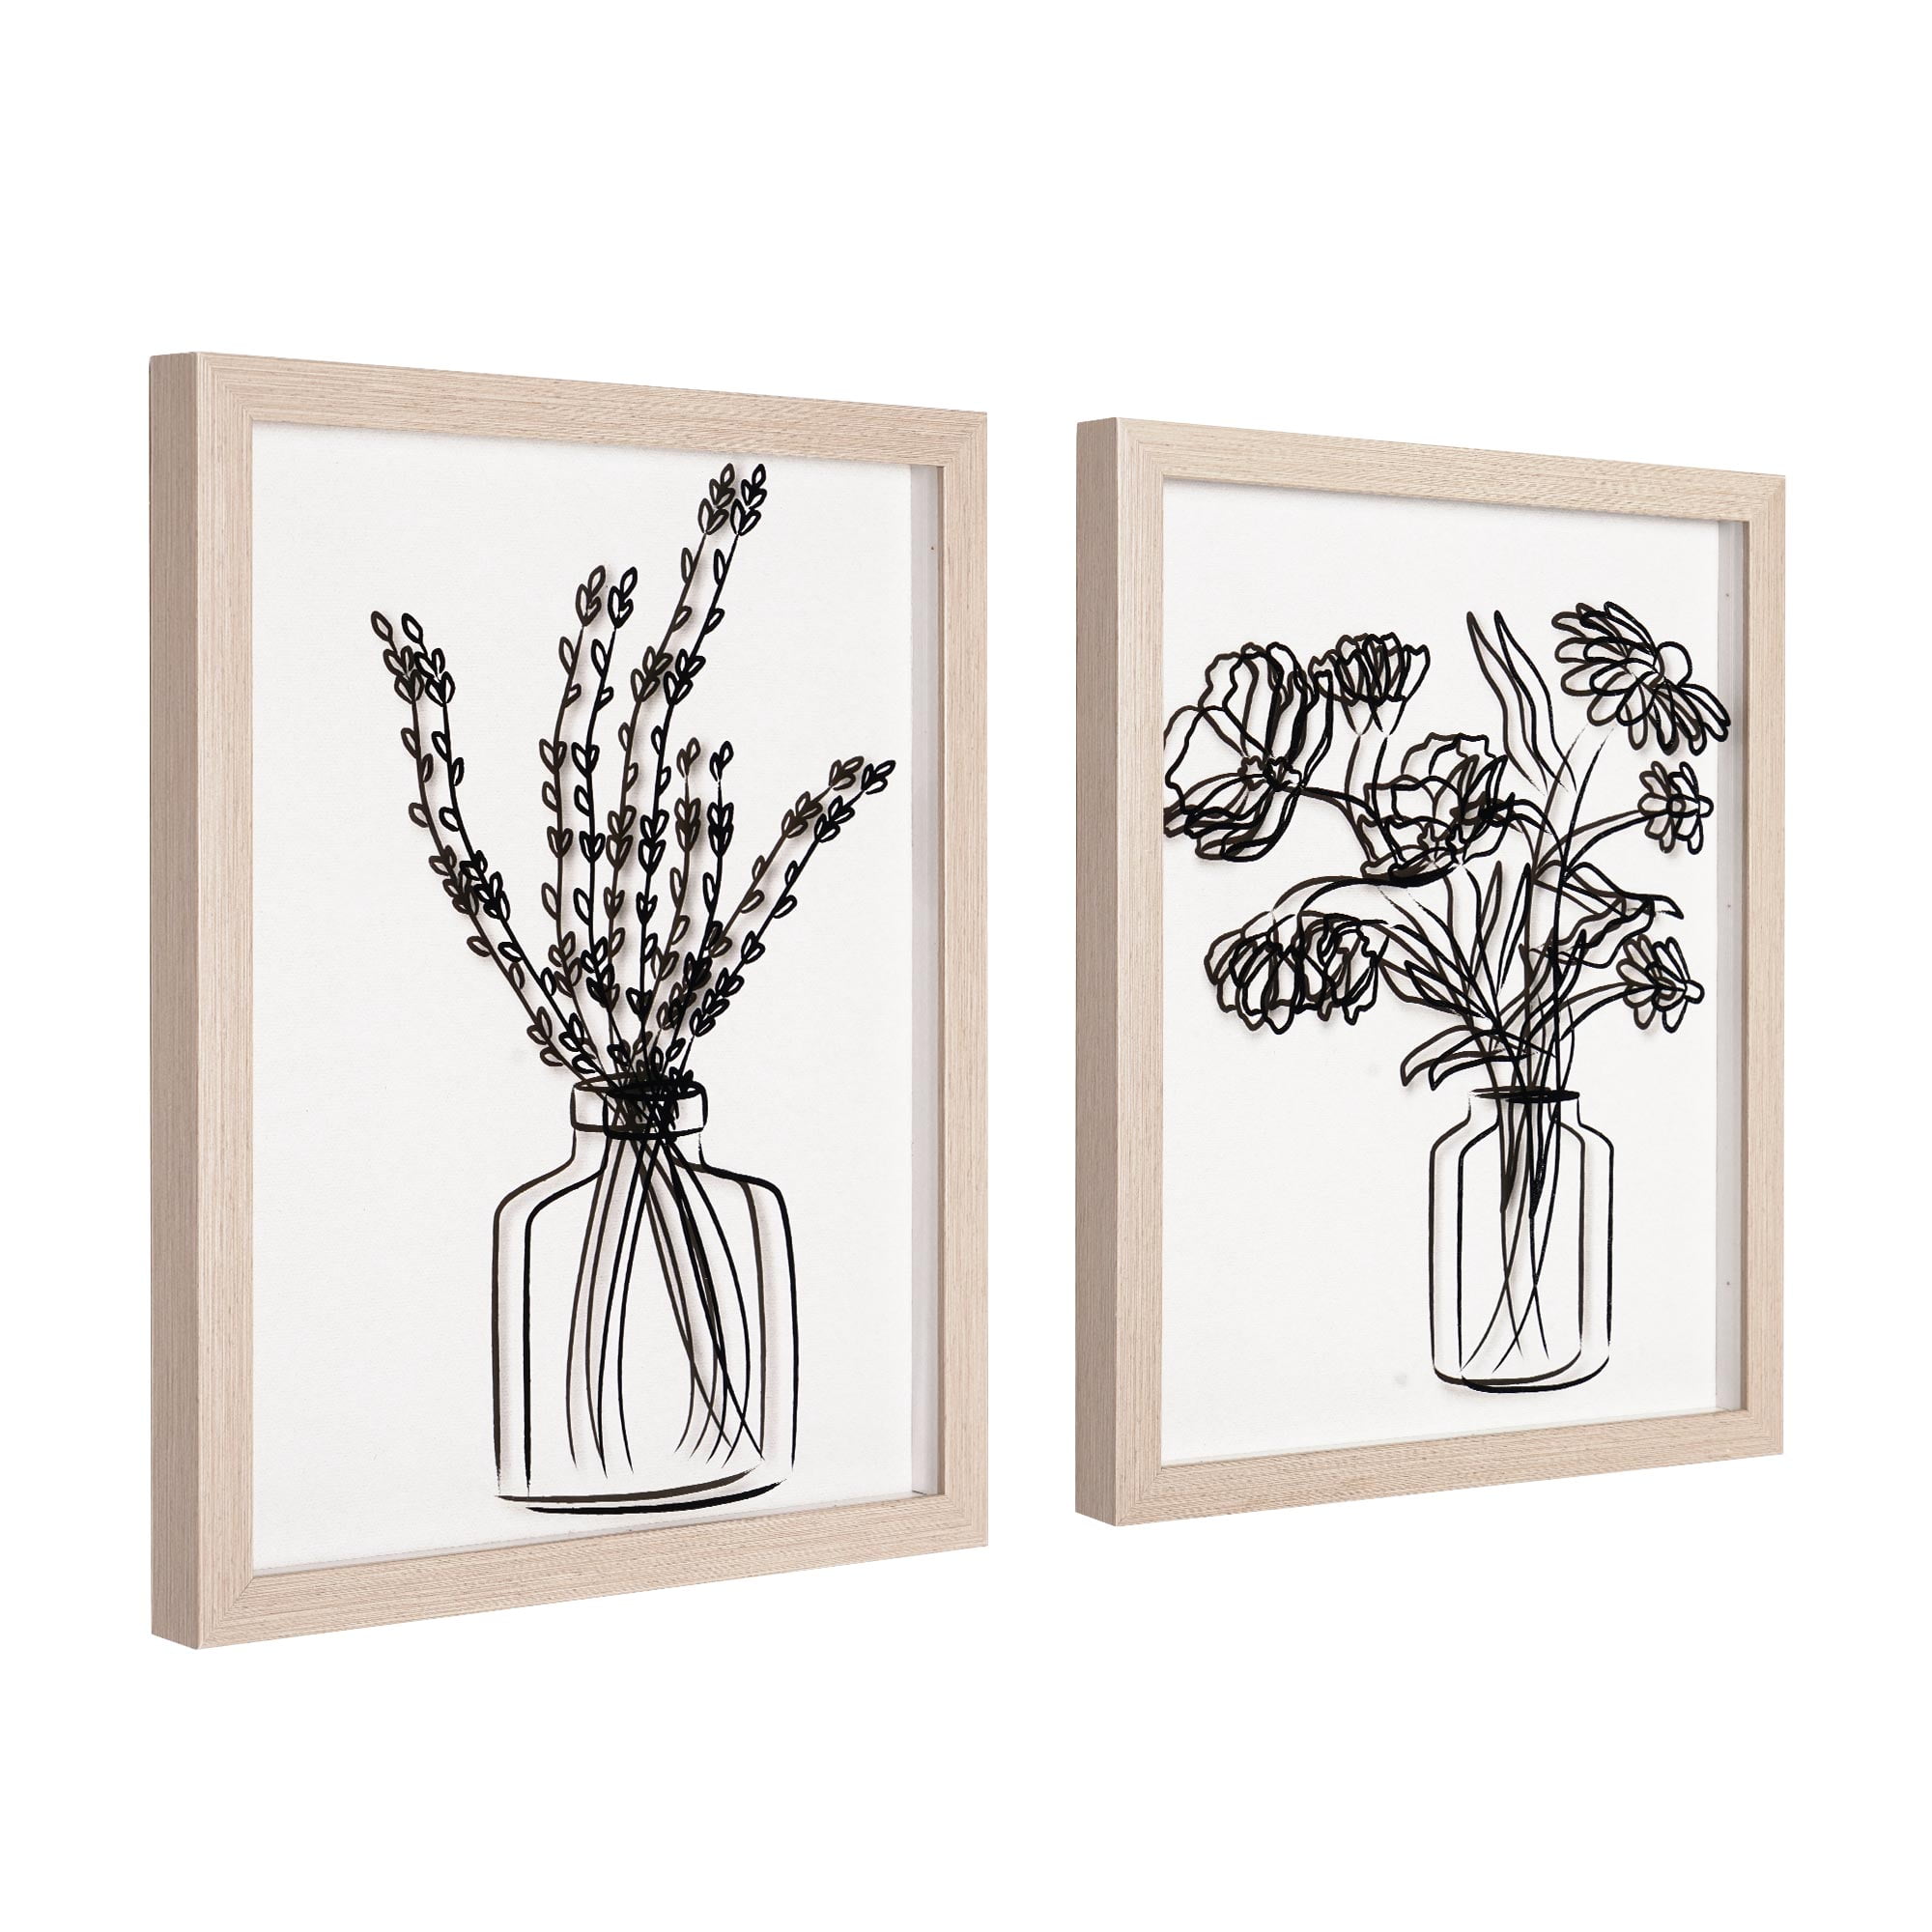 Florals in Vase set of 2 Black Print on Clear Framed Wall Decor 11" x 14"